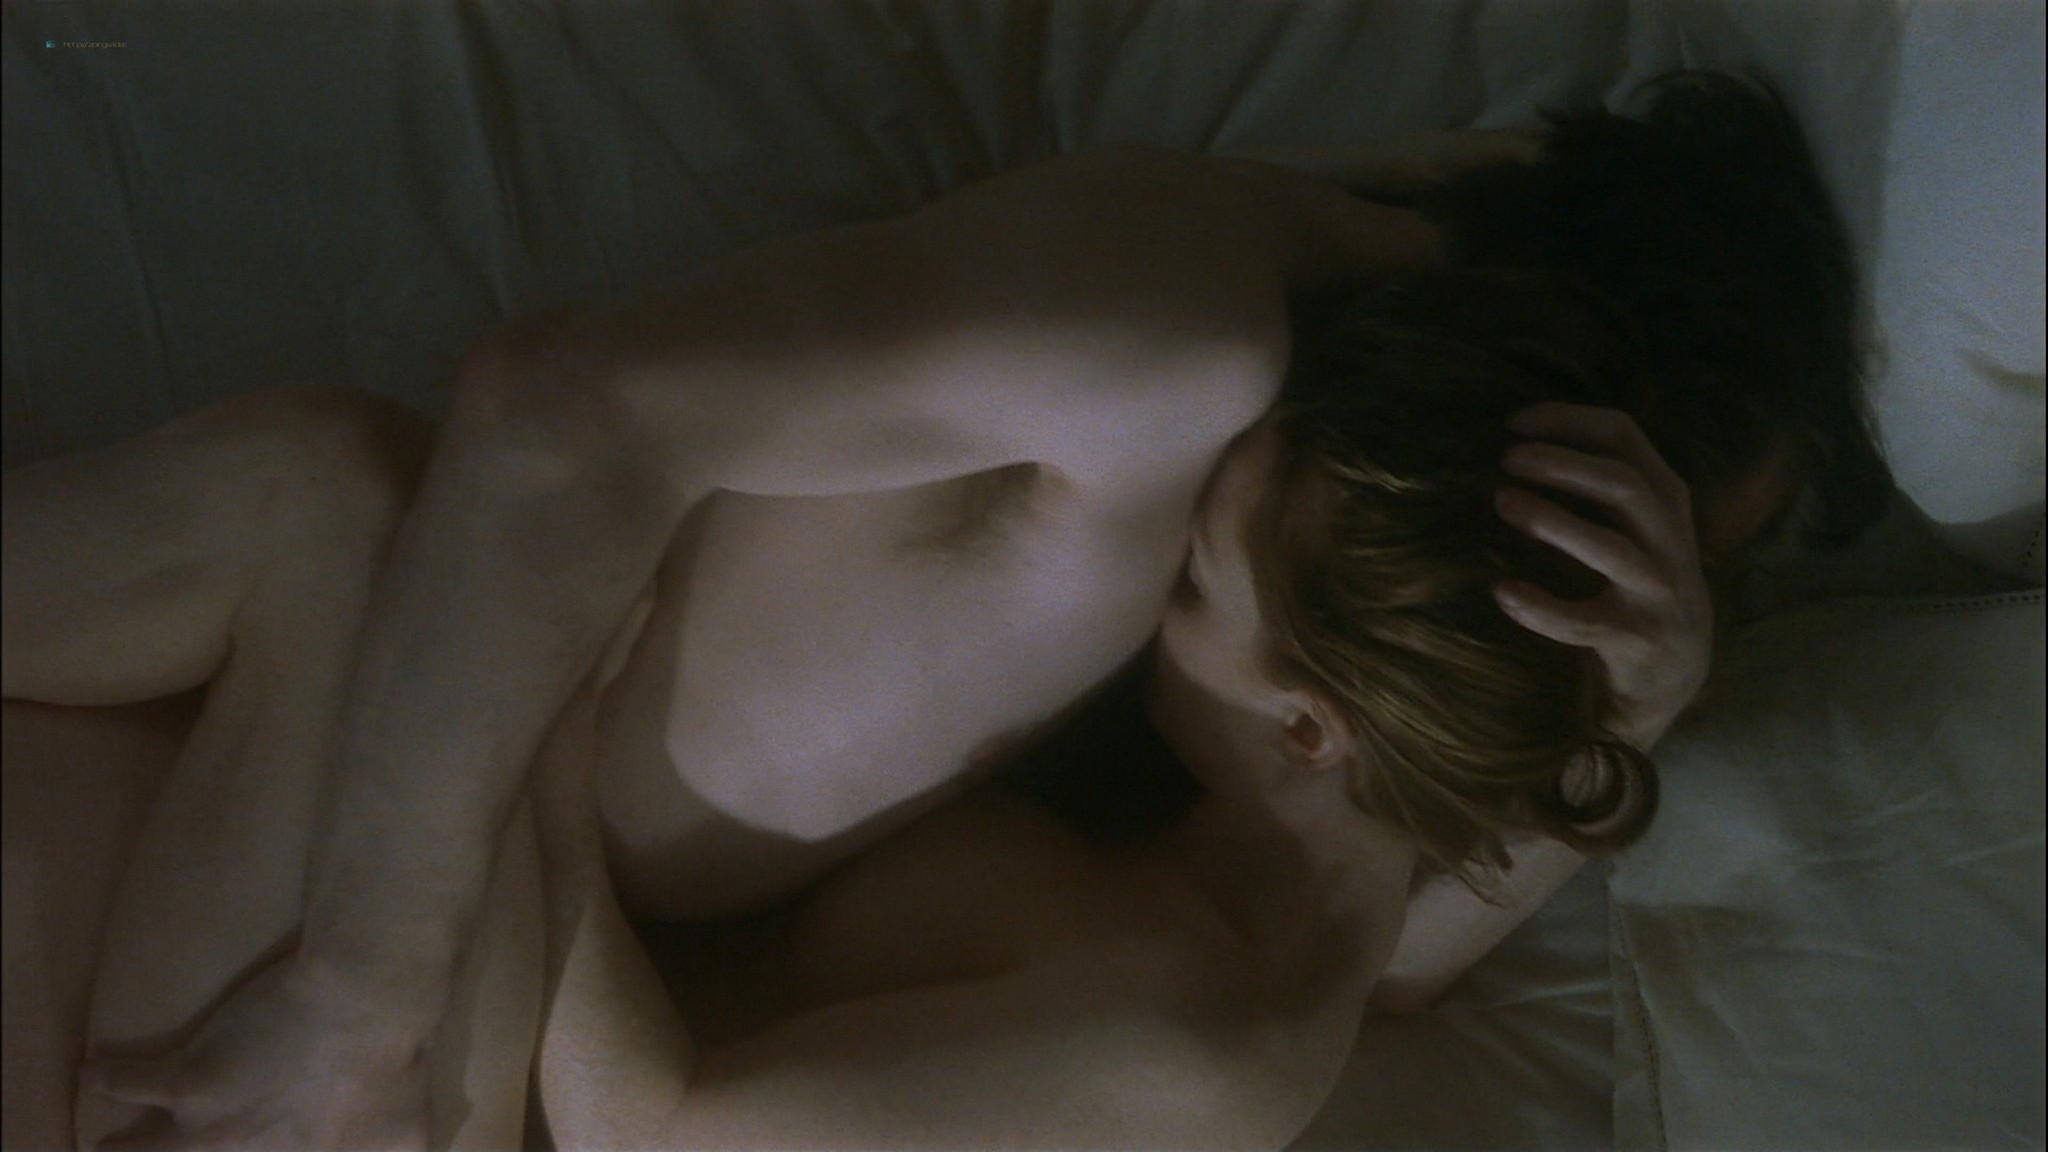 https://www.zorg.video/wp-content/uploads/2017/06/Julianne-Moore-nude-topless-and-sex-The-End-of-the-Affair-1999-HD-1080p-WEB-010.jpg